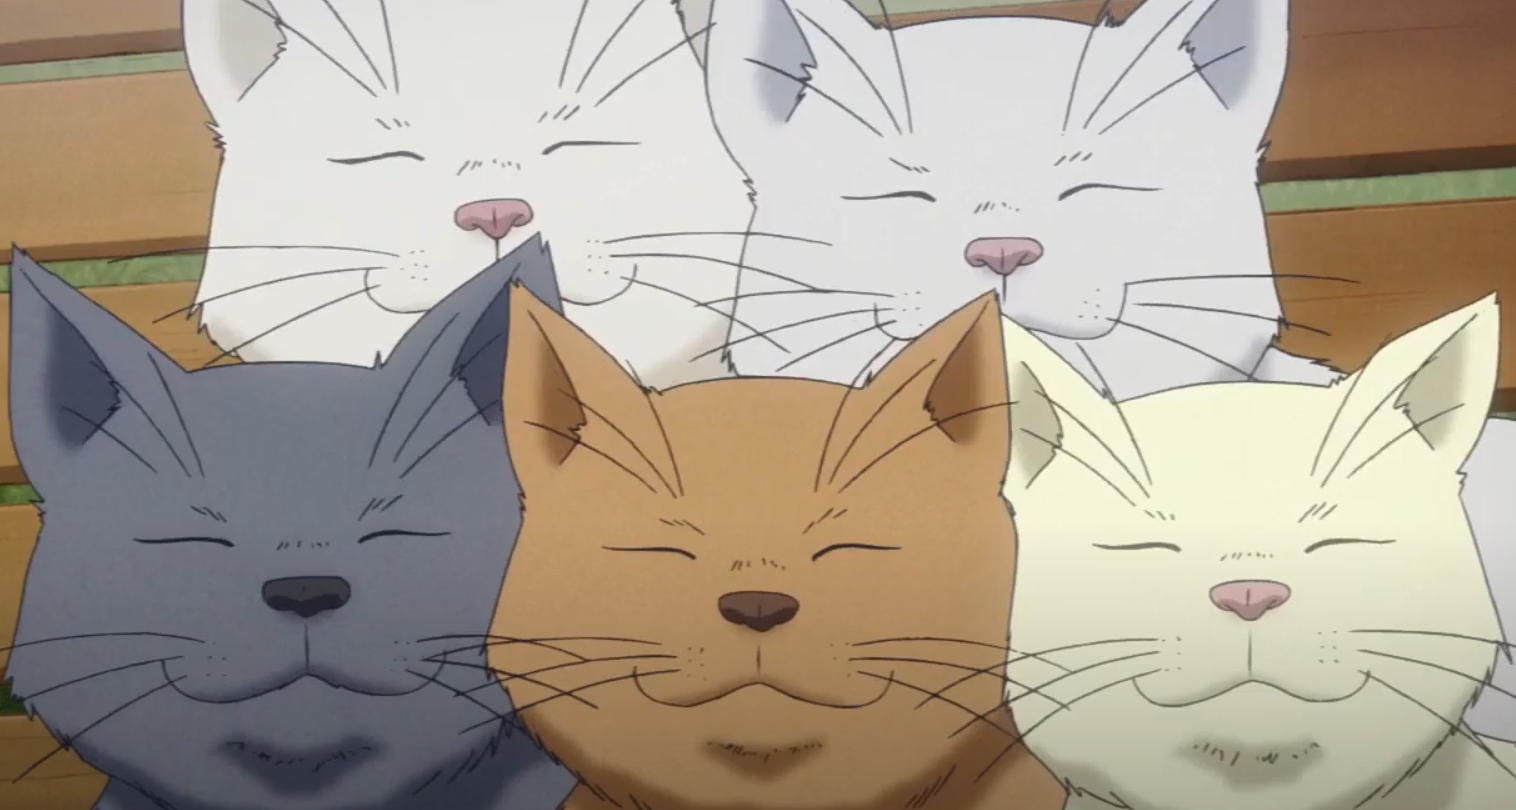 Five cartoon cats smiling at the viewer, all visually corresponding to one of the main characters.